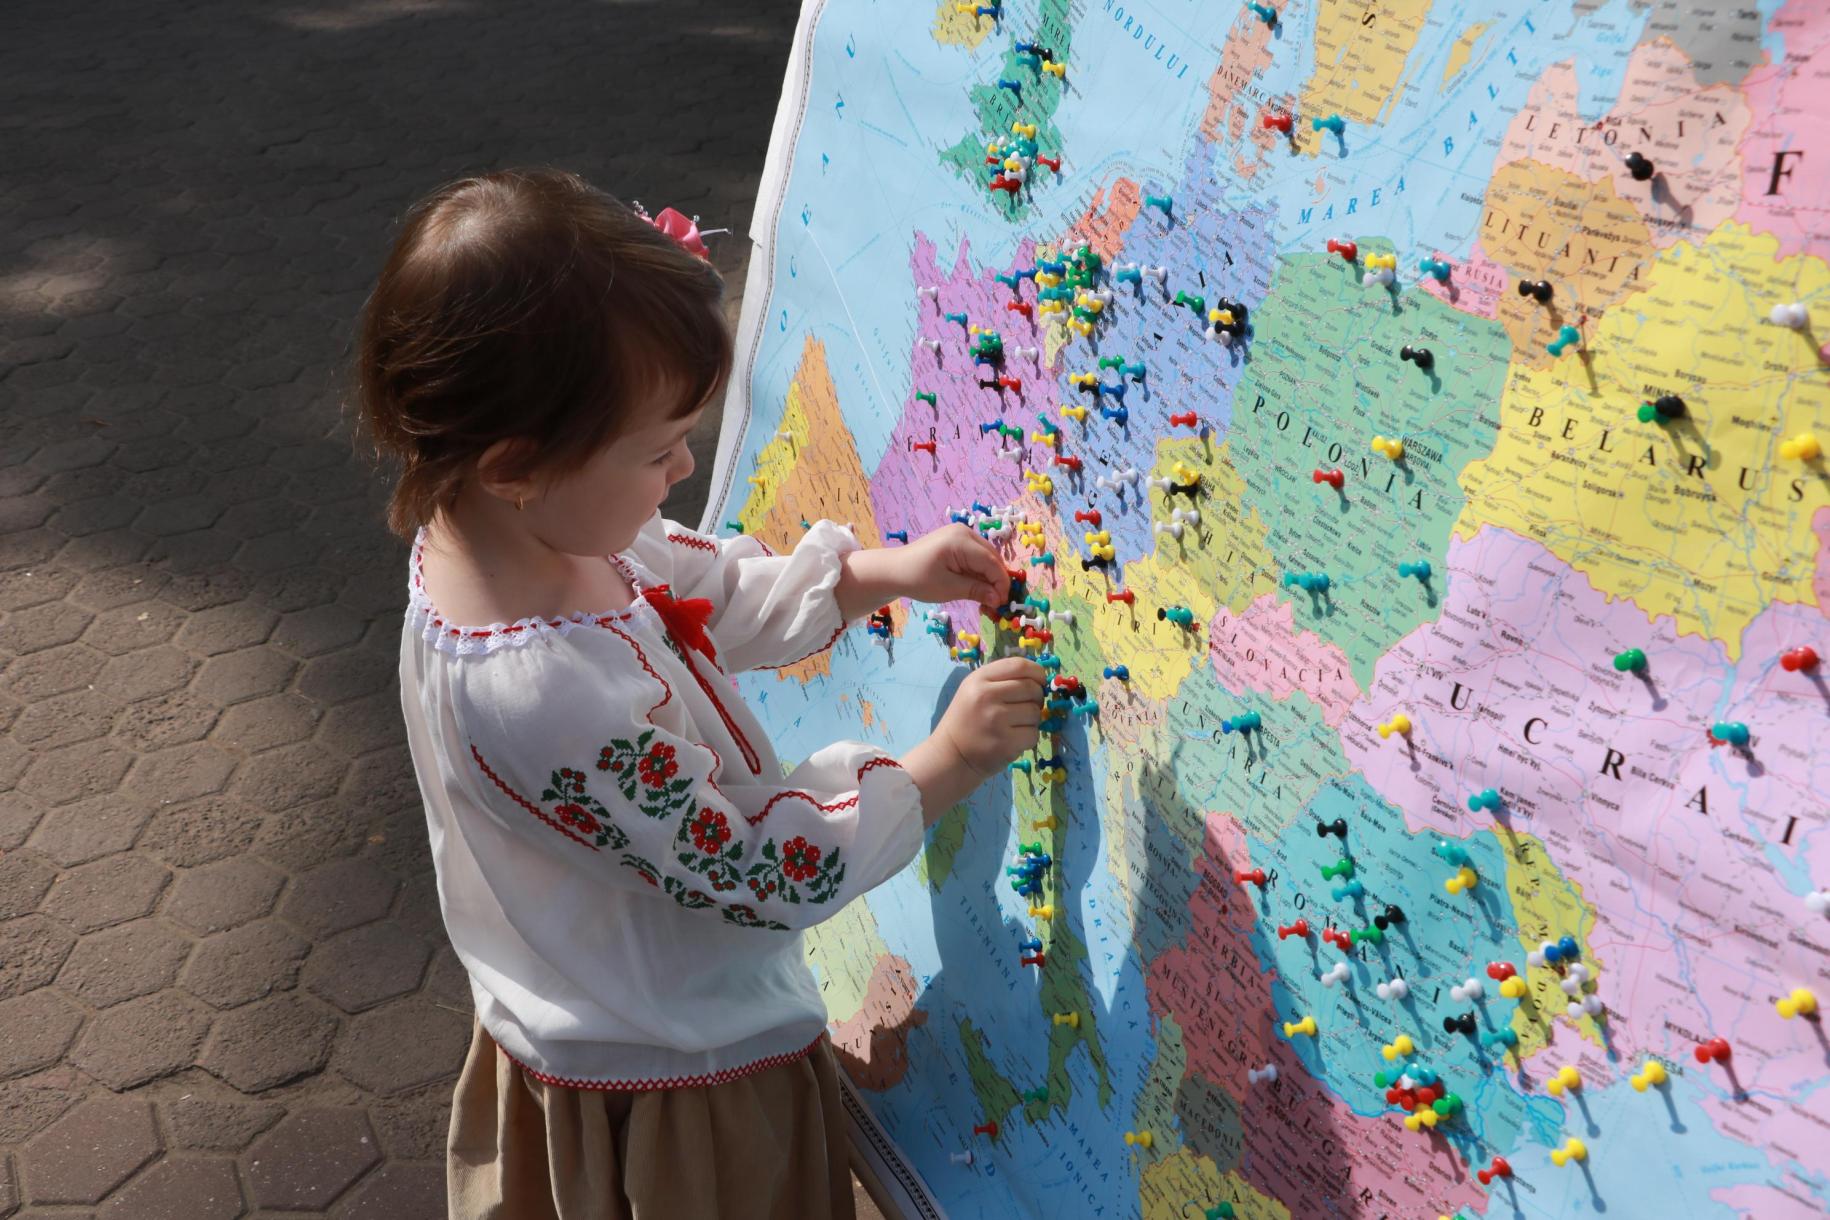 A little girl touches the thumbtacks placed on a map of the country.